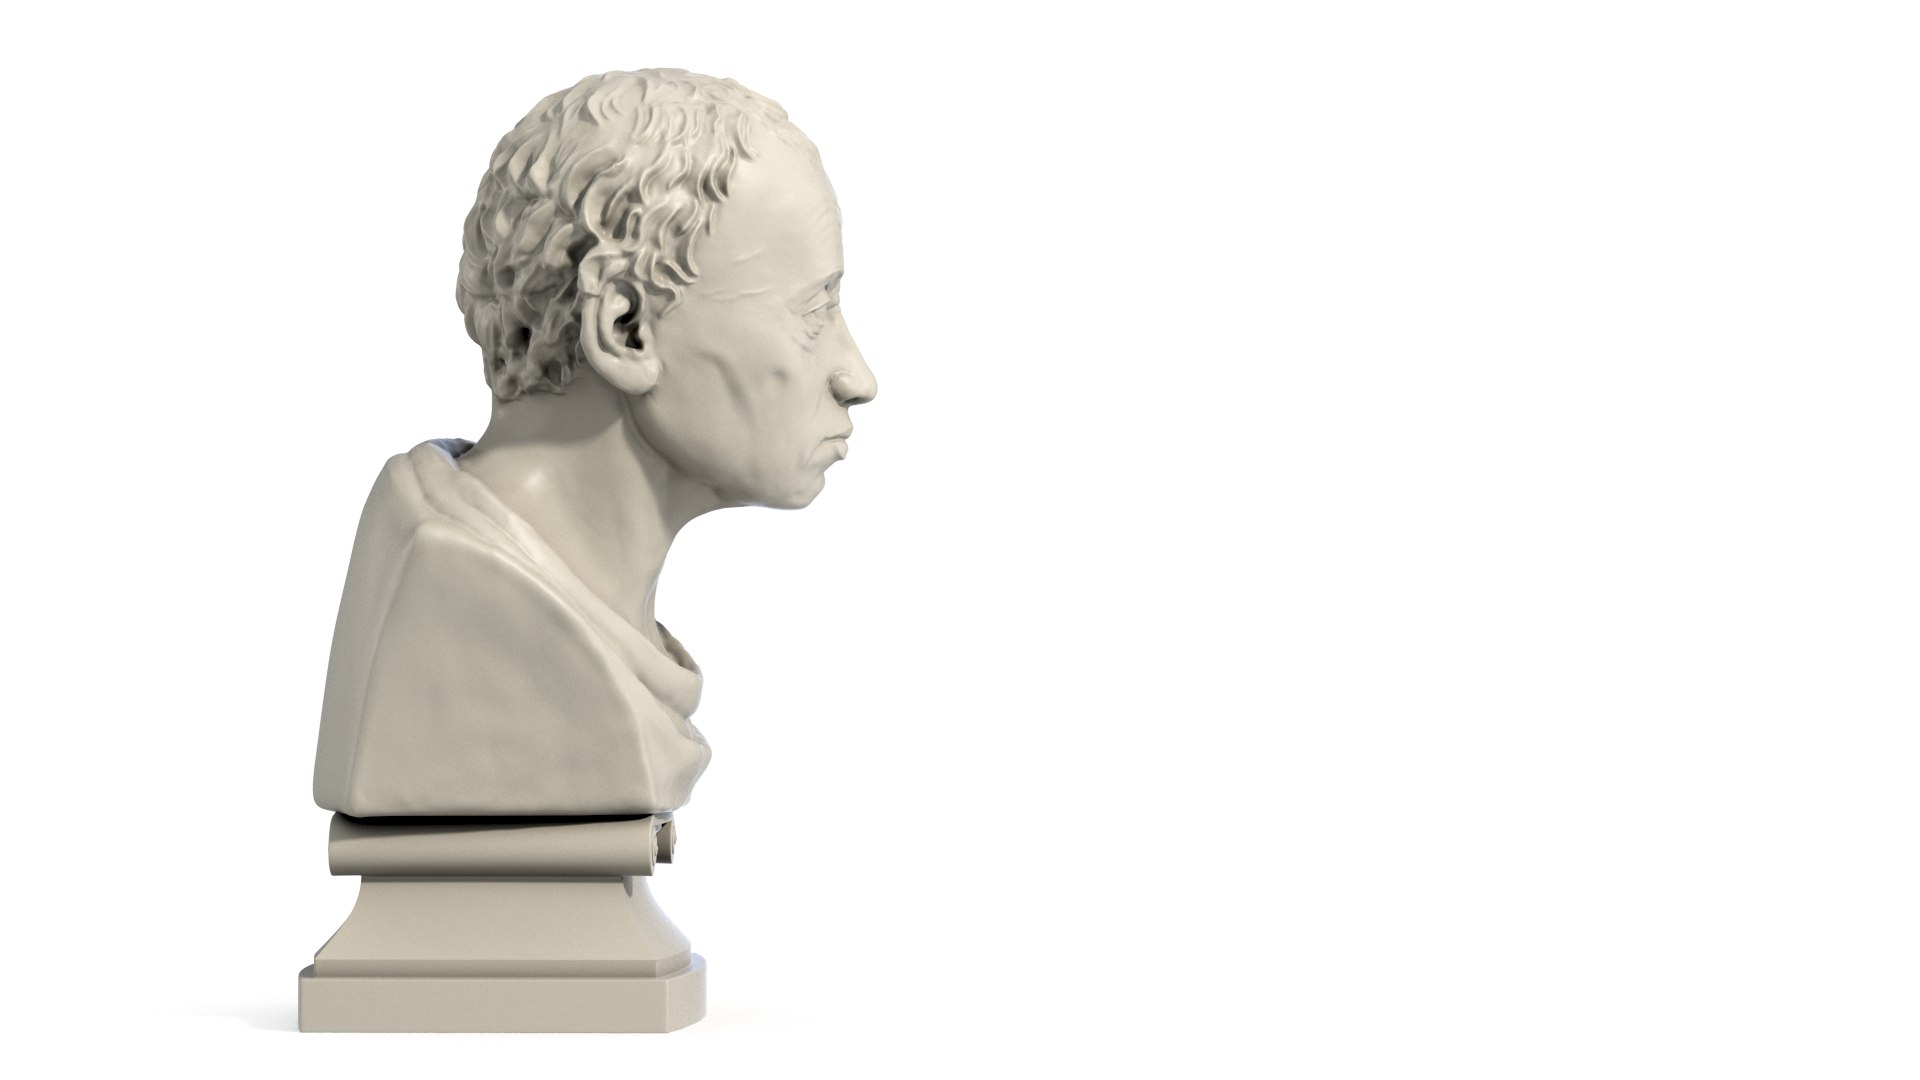 Immanuel Kant 35 cm bust Busts with personality -  Portugal